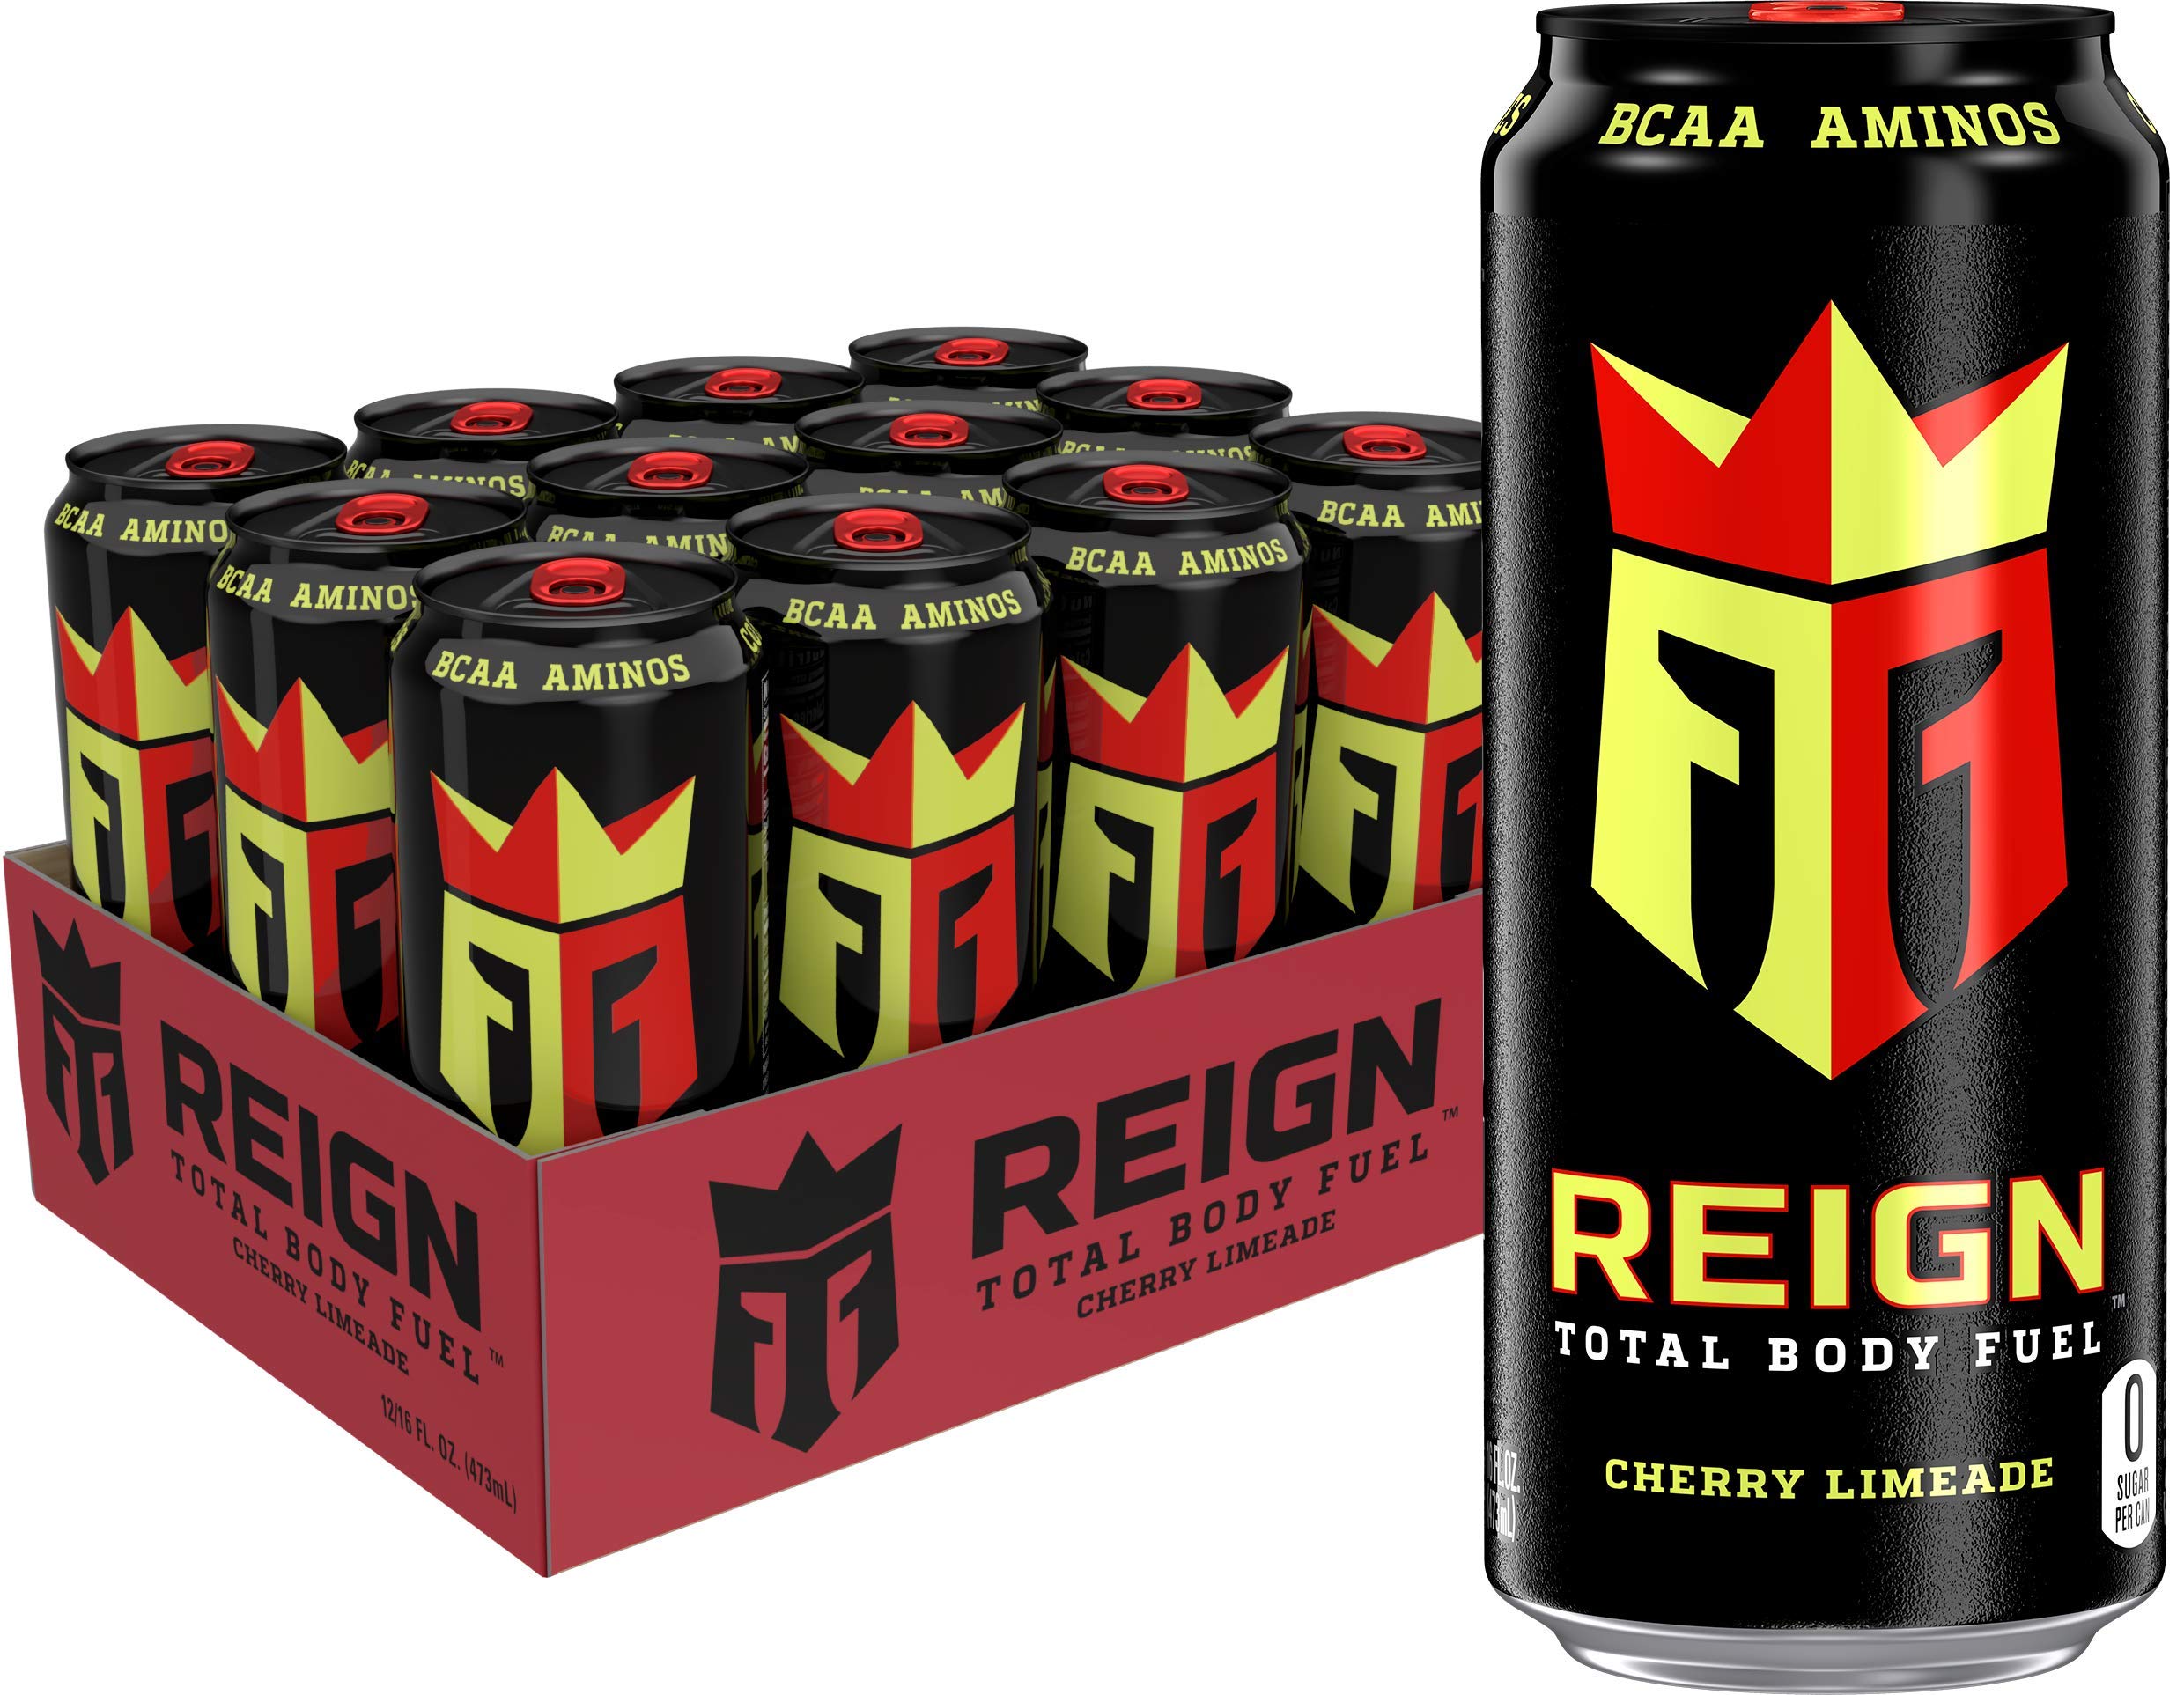 Reign Total Body Fuel, Cherry Limeade, Fitness & Performance Drink, 16 Fl Oz (Pack of 12)